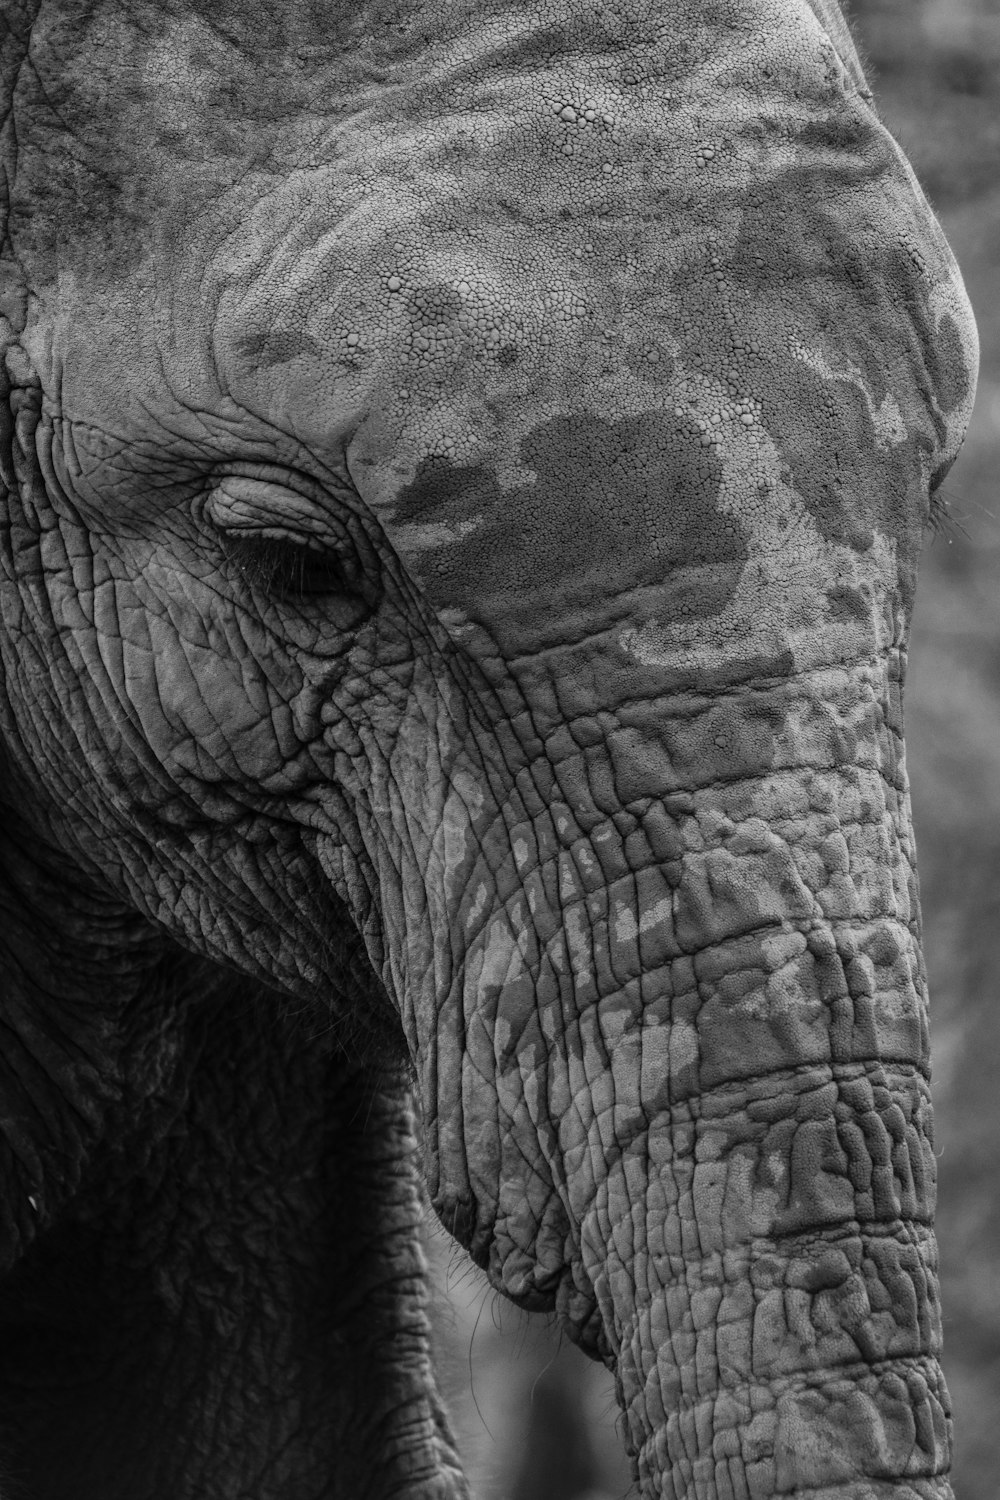 an elephant with its eyes closed